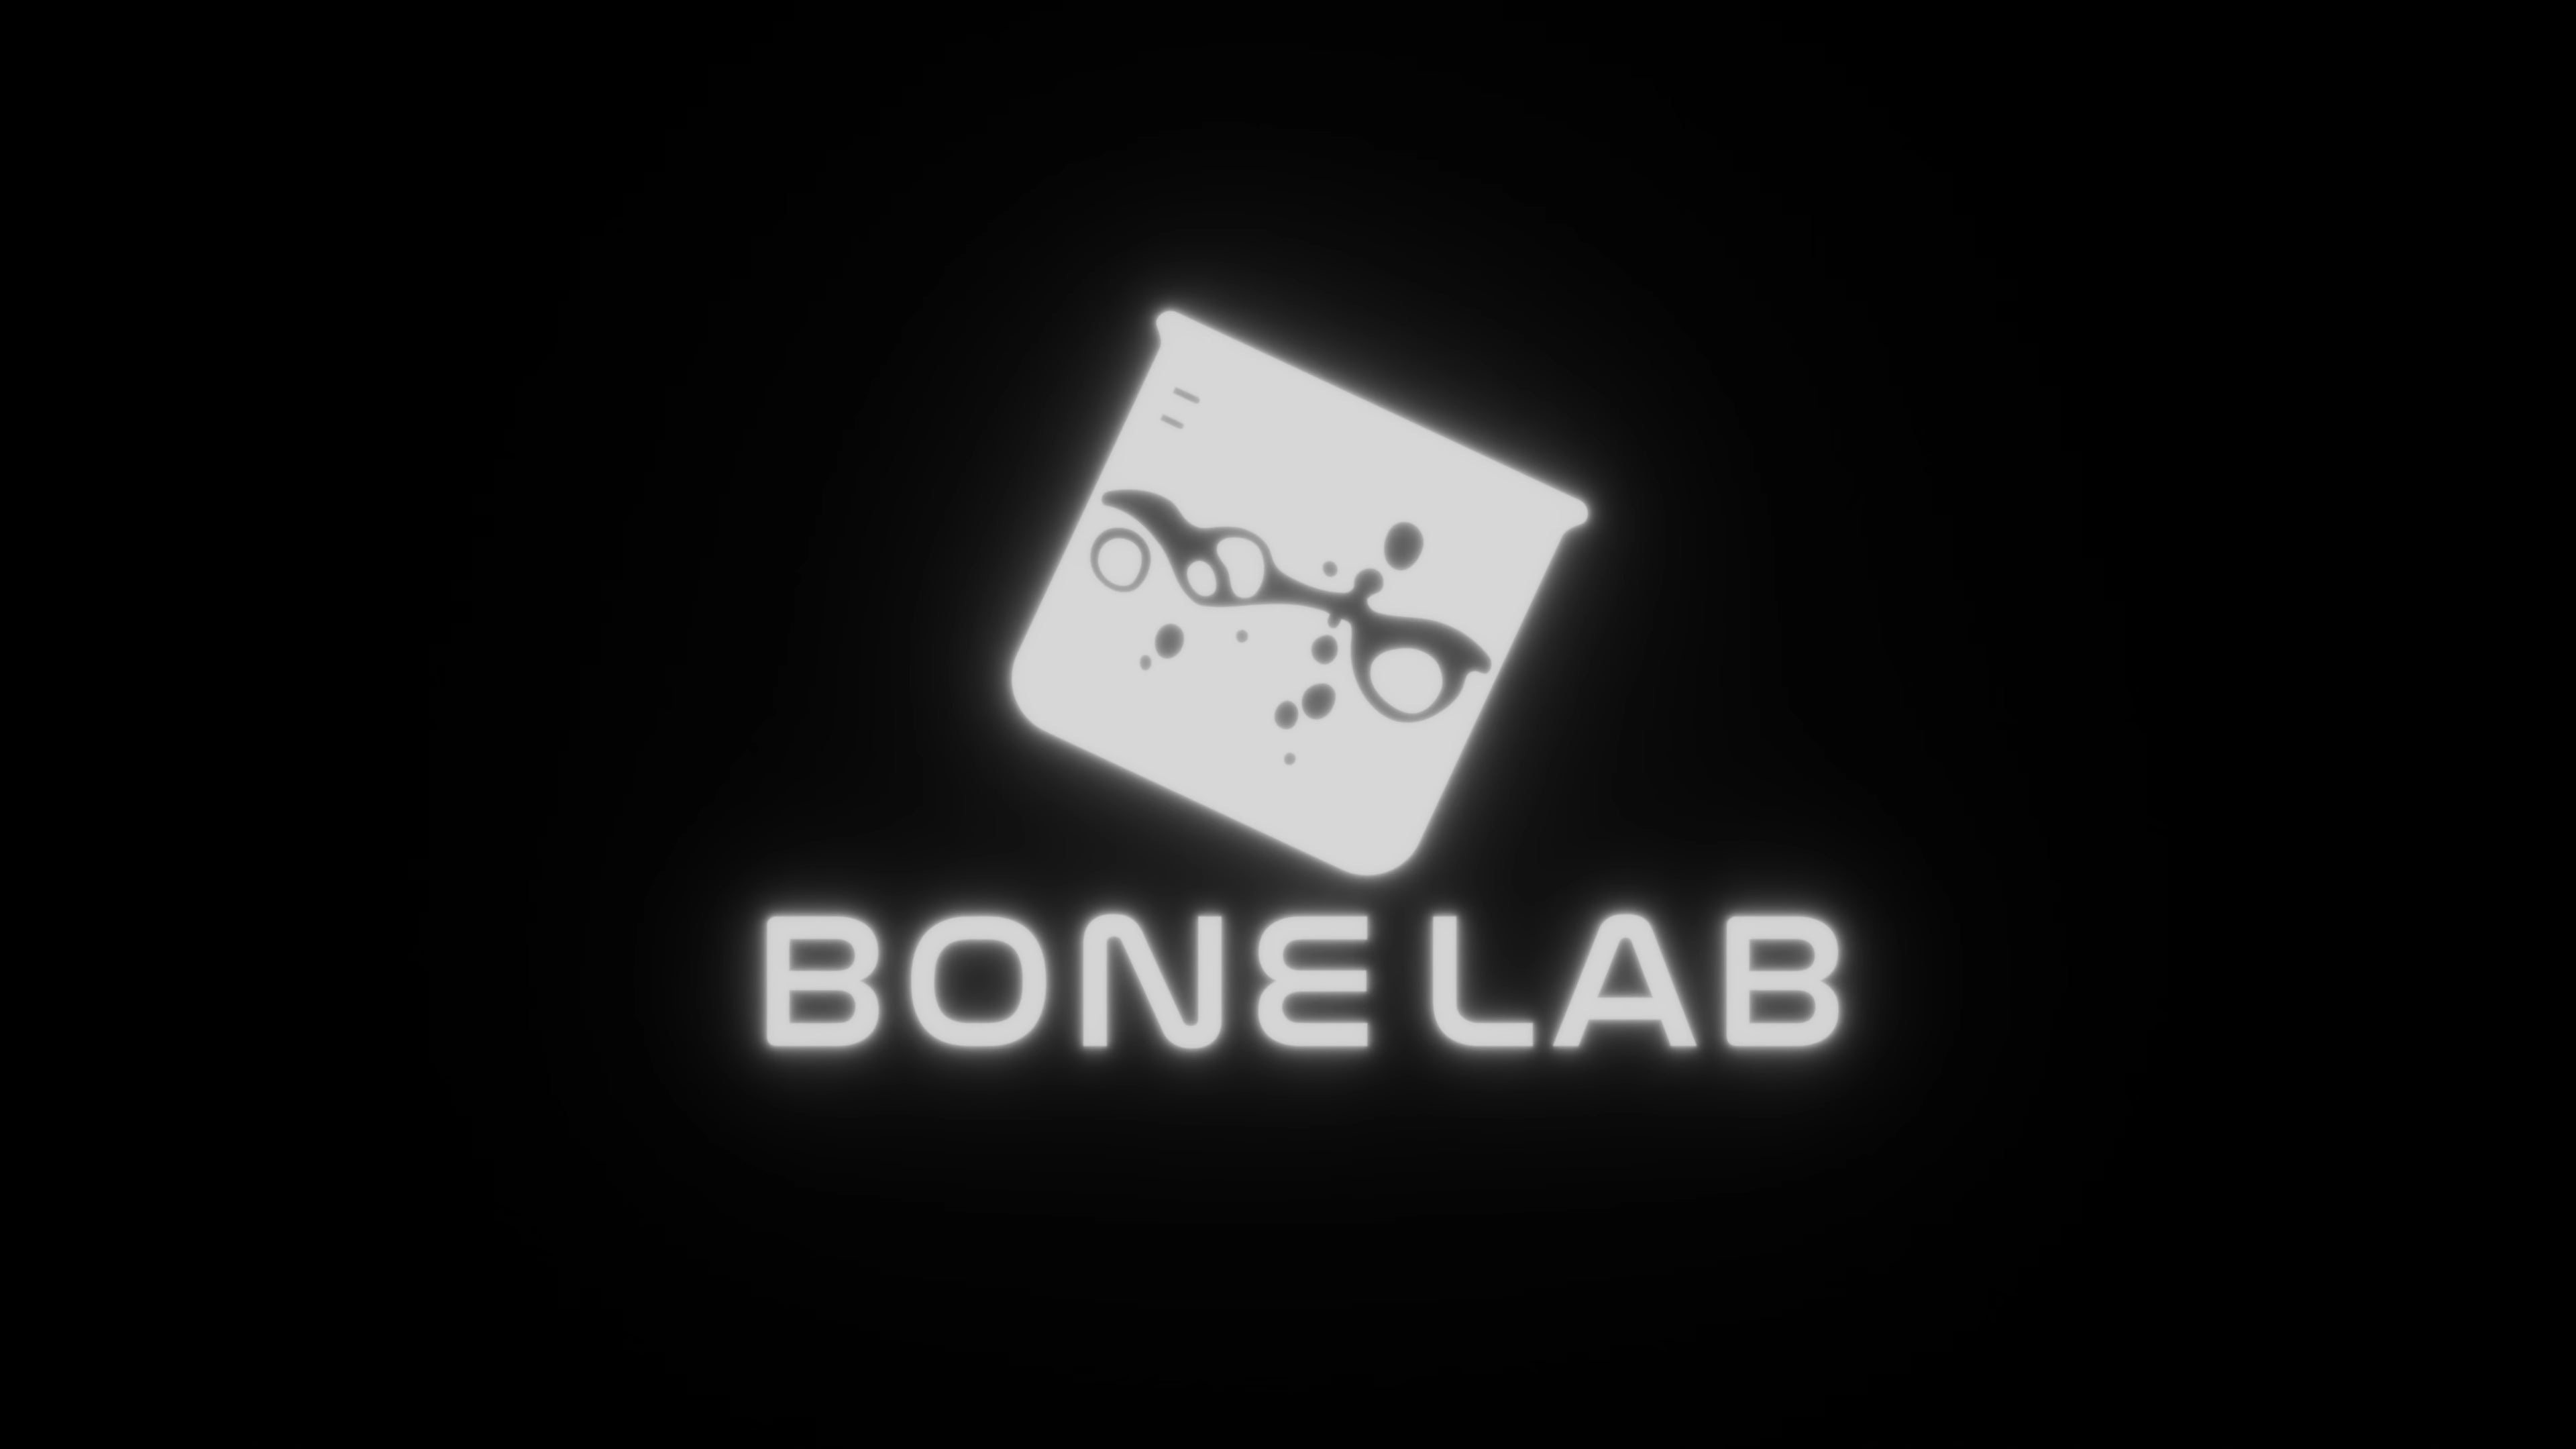 Made a 4K bonelab desktop background for those who want it